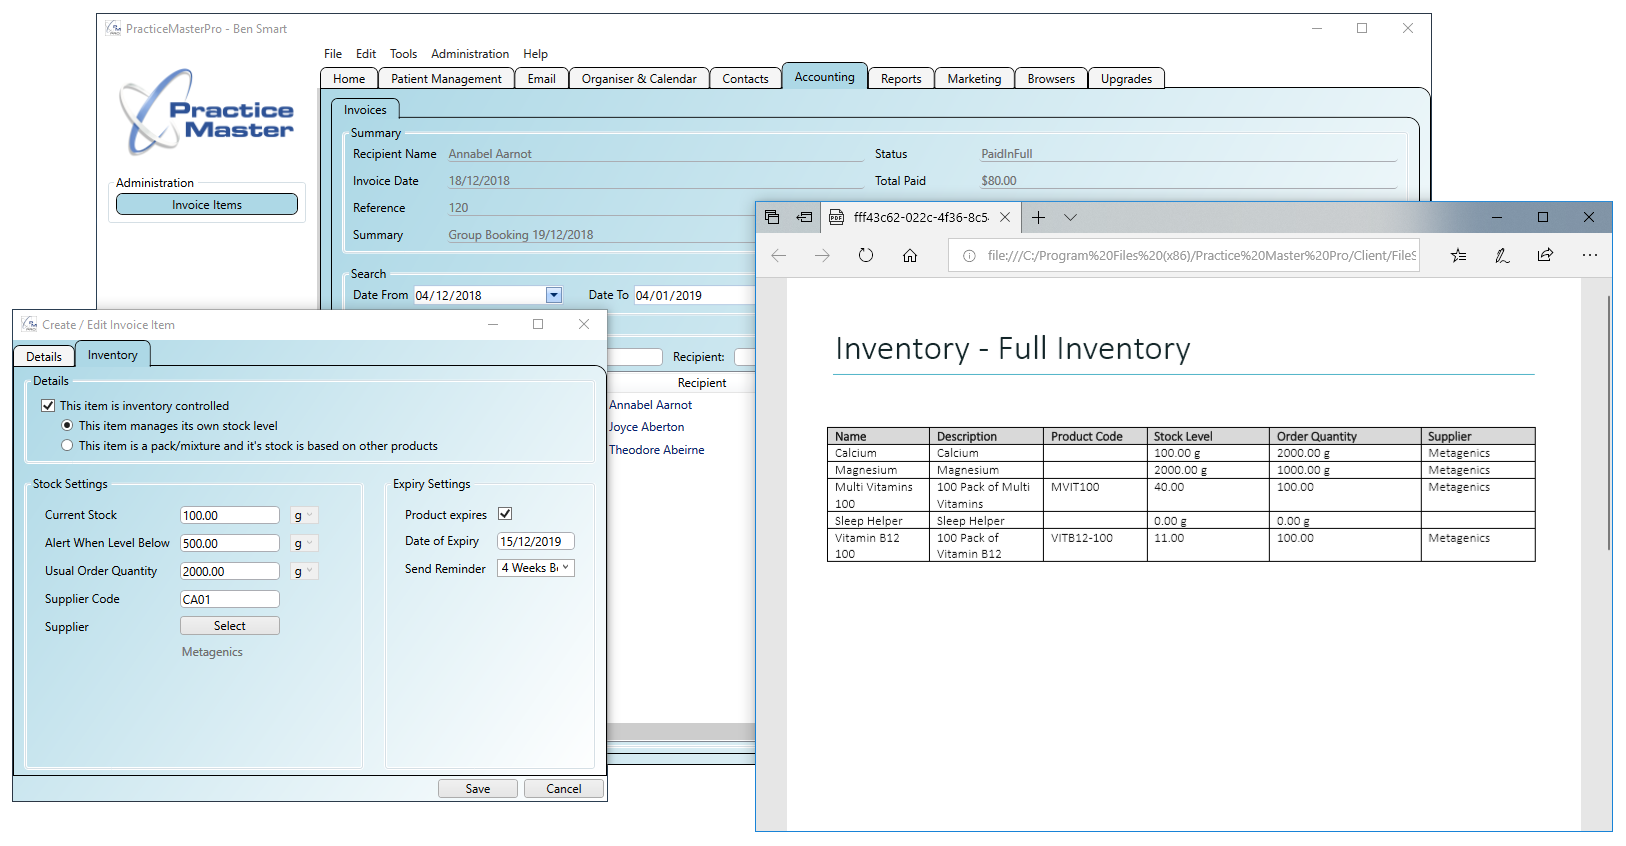 Accounts & billing integrates with inventory and stock levels